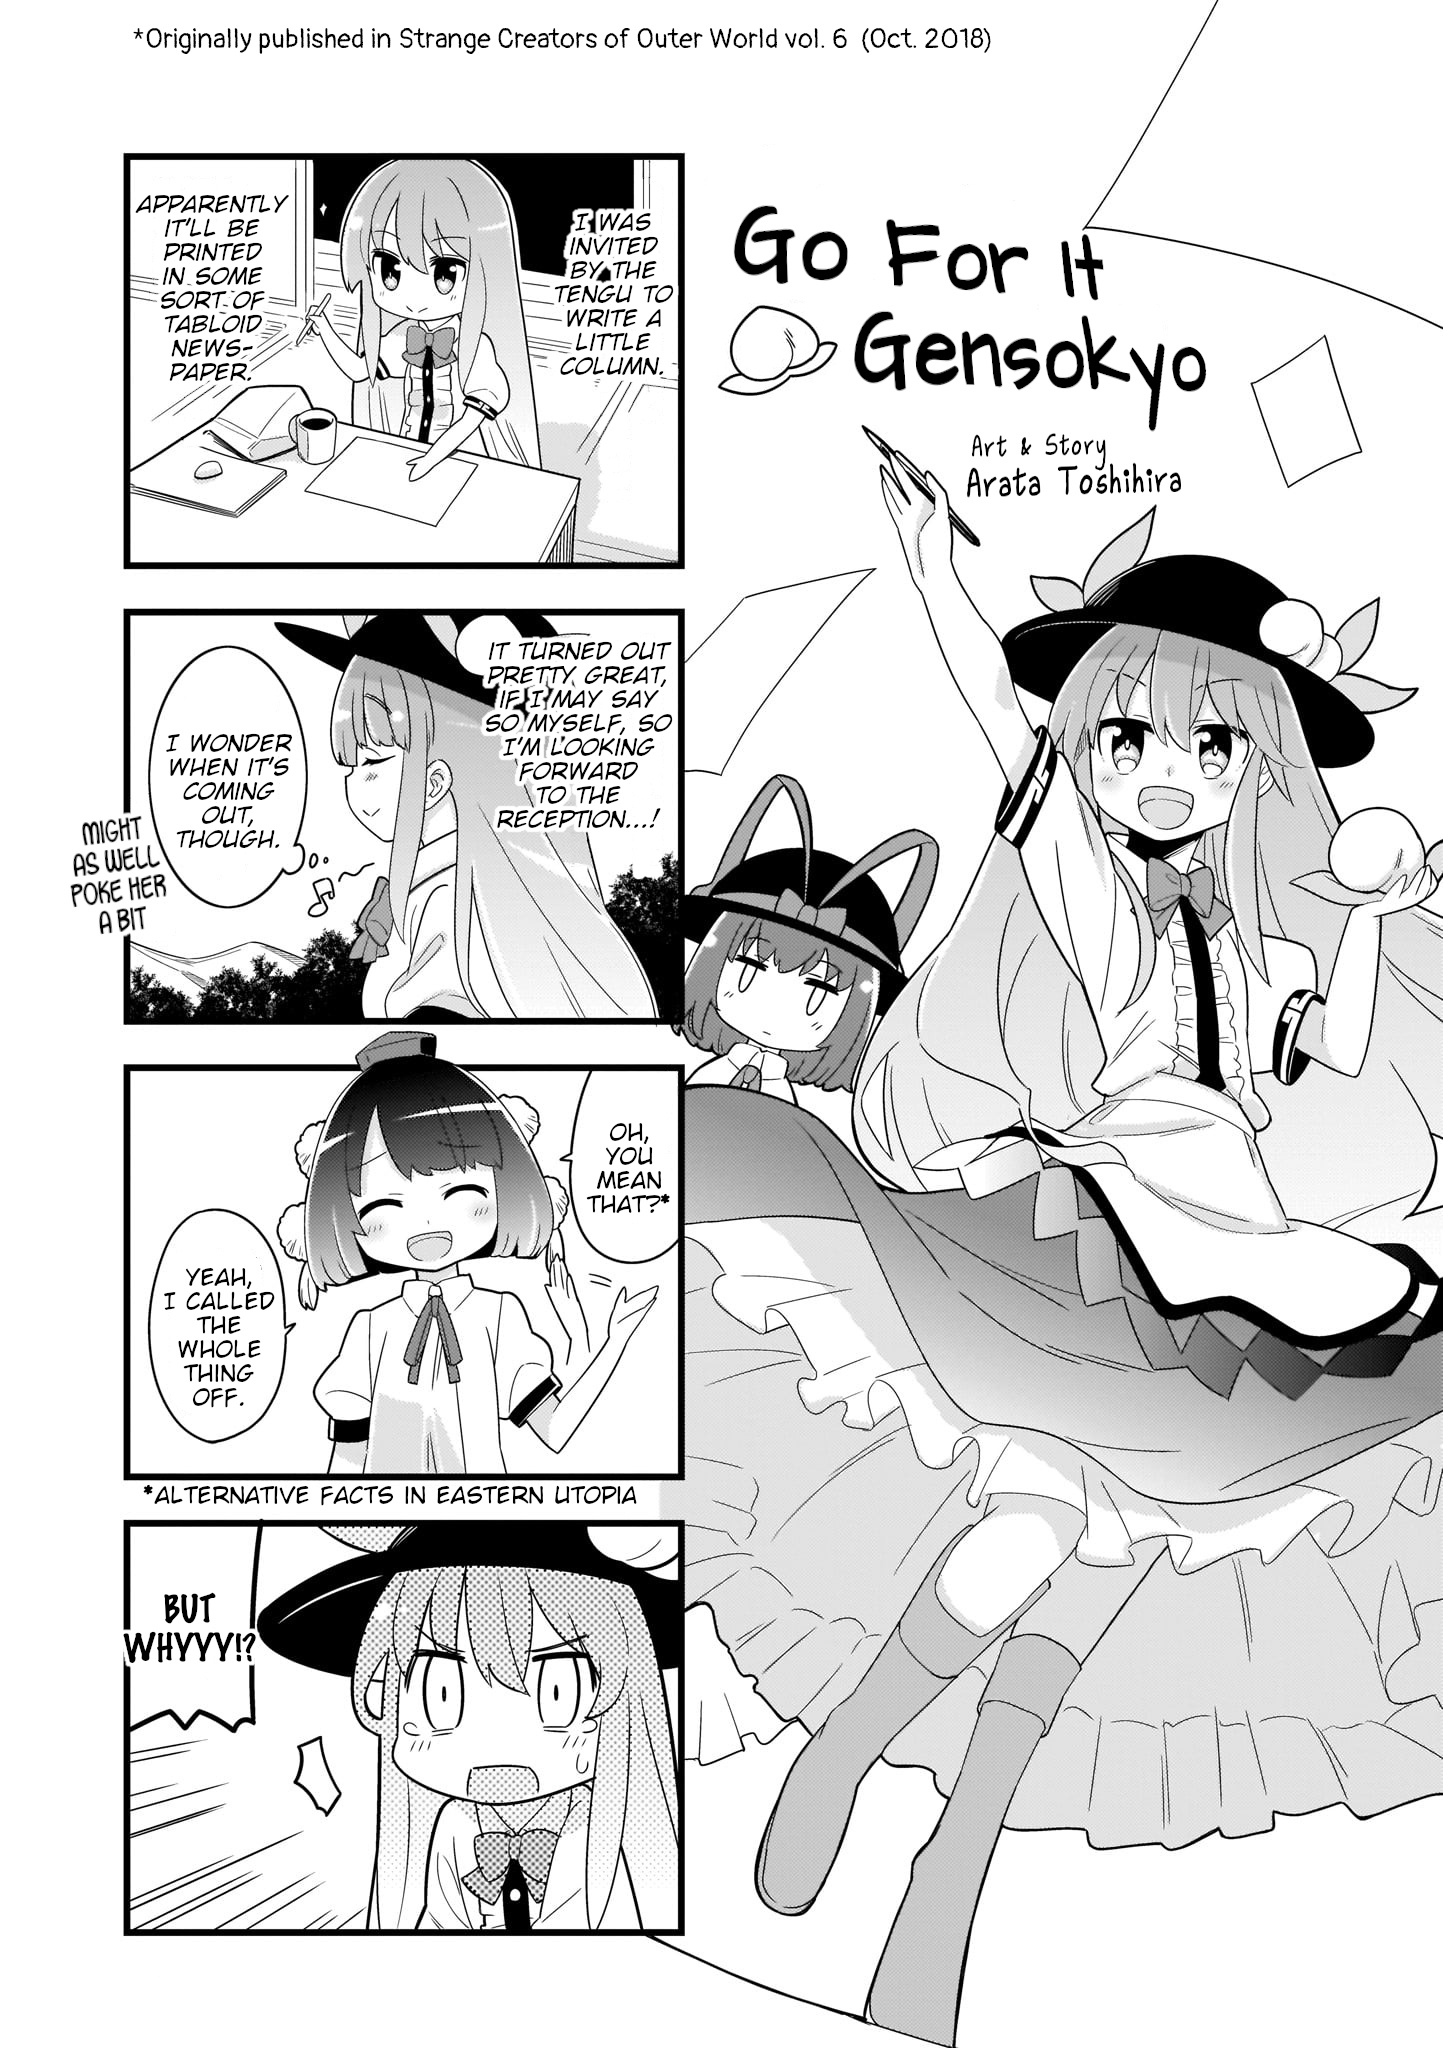 Go For It Gensokyo - Page 1